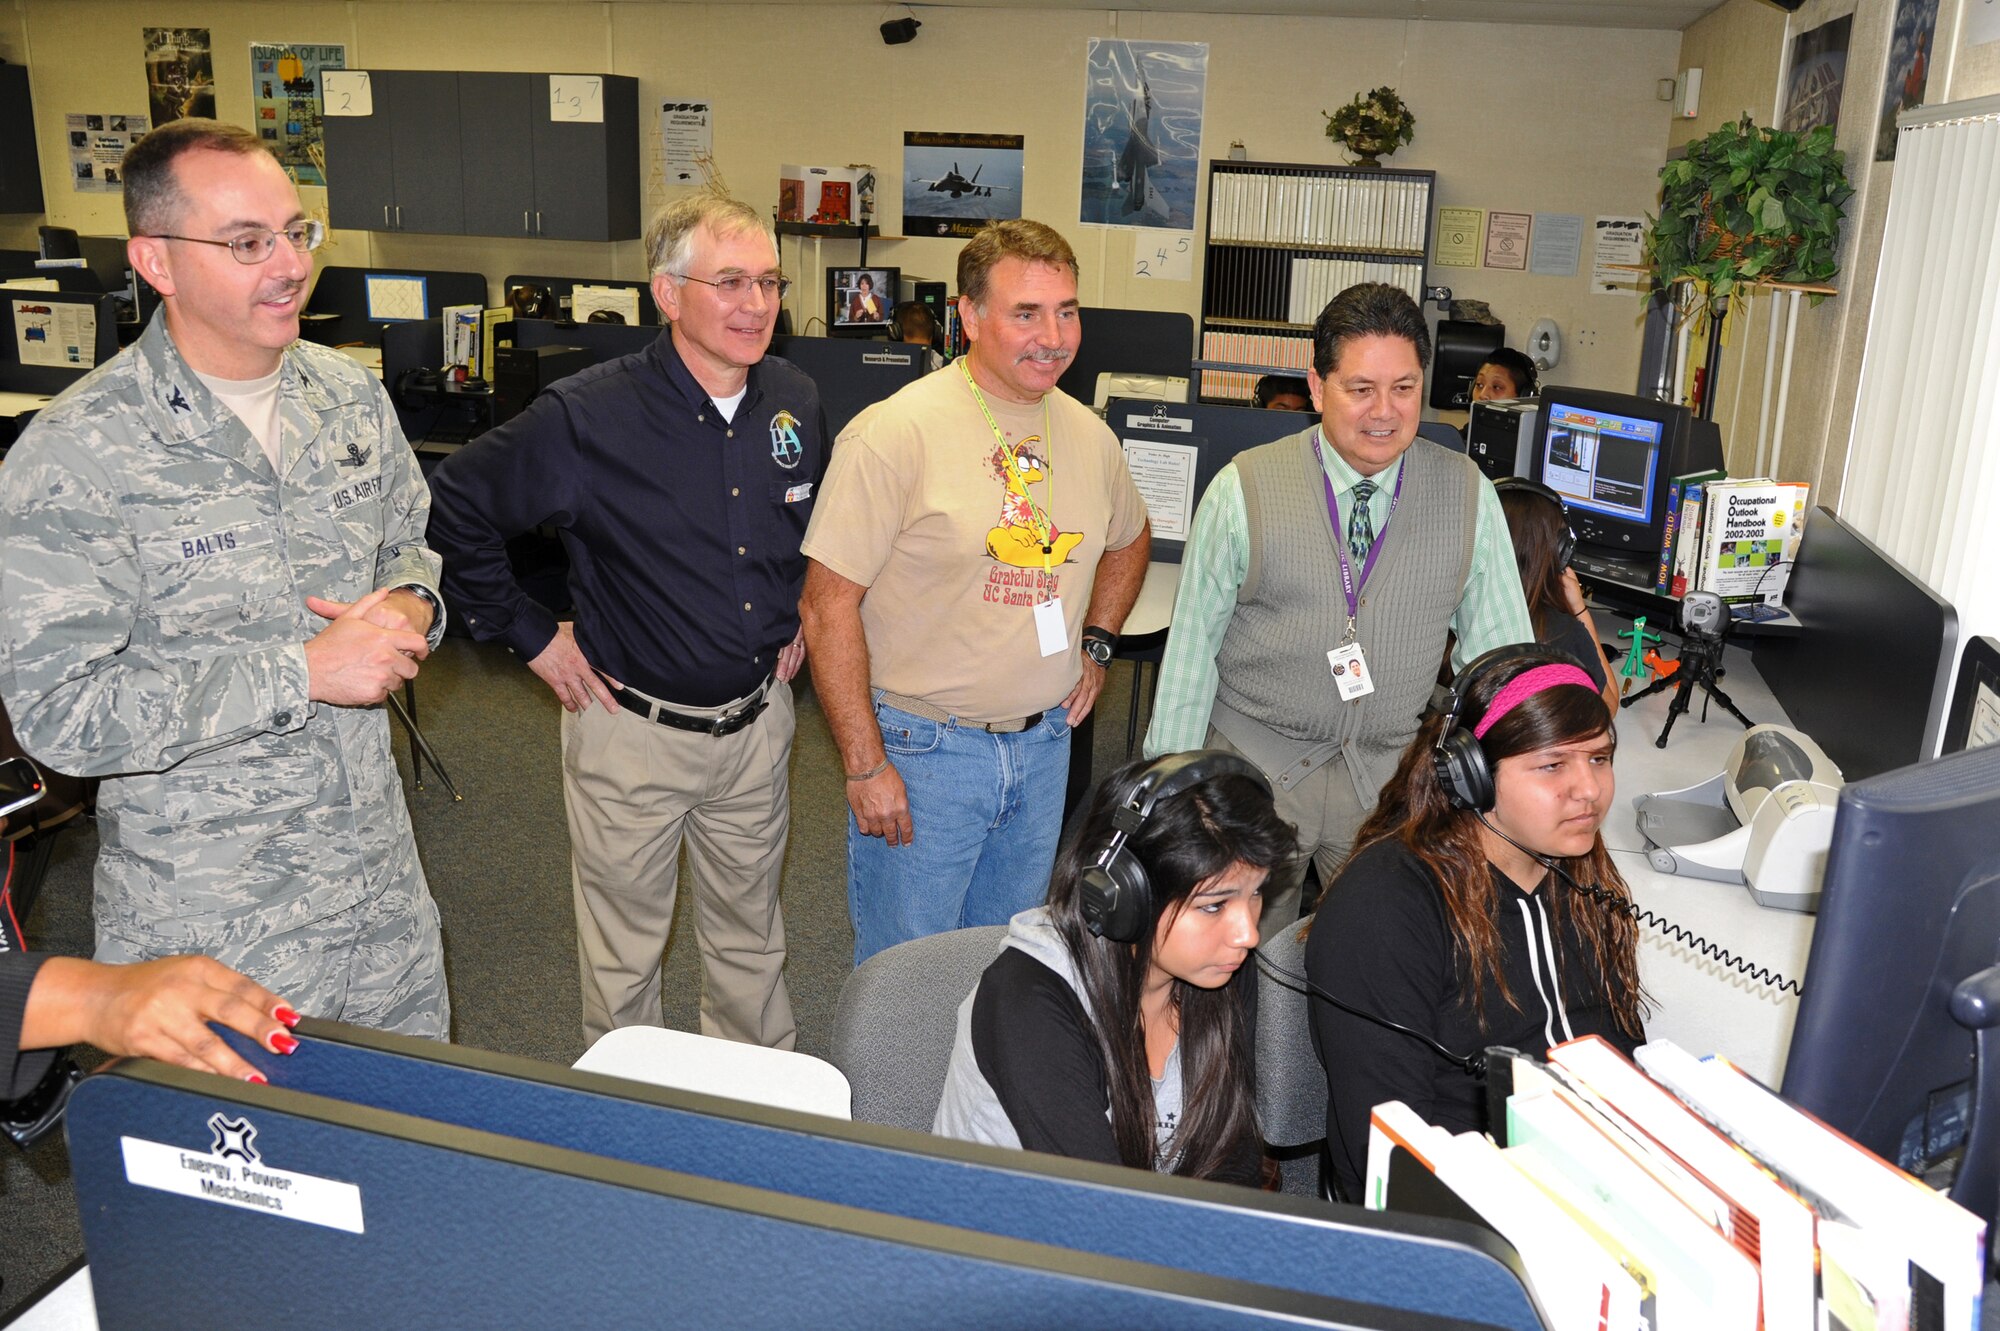 SANTA MARIA, Ca. -- Col Keith Balts, 30th Space Wing commander, Steve Heuring, donation lead, Rob Bergan, Fesler Junior High School assistant principal, and Phil Alvarado, superintendent at Santa Maria Bonita School District, tour the Industrial Tech Lab at Fesler Junior High School Friday, Friday Mar. 7. The 30th Space Wing recently donated excess computers through the “Computer for learning” program to support the school’s lab. (Contributed Photo/Mark Mackley)